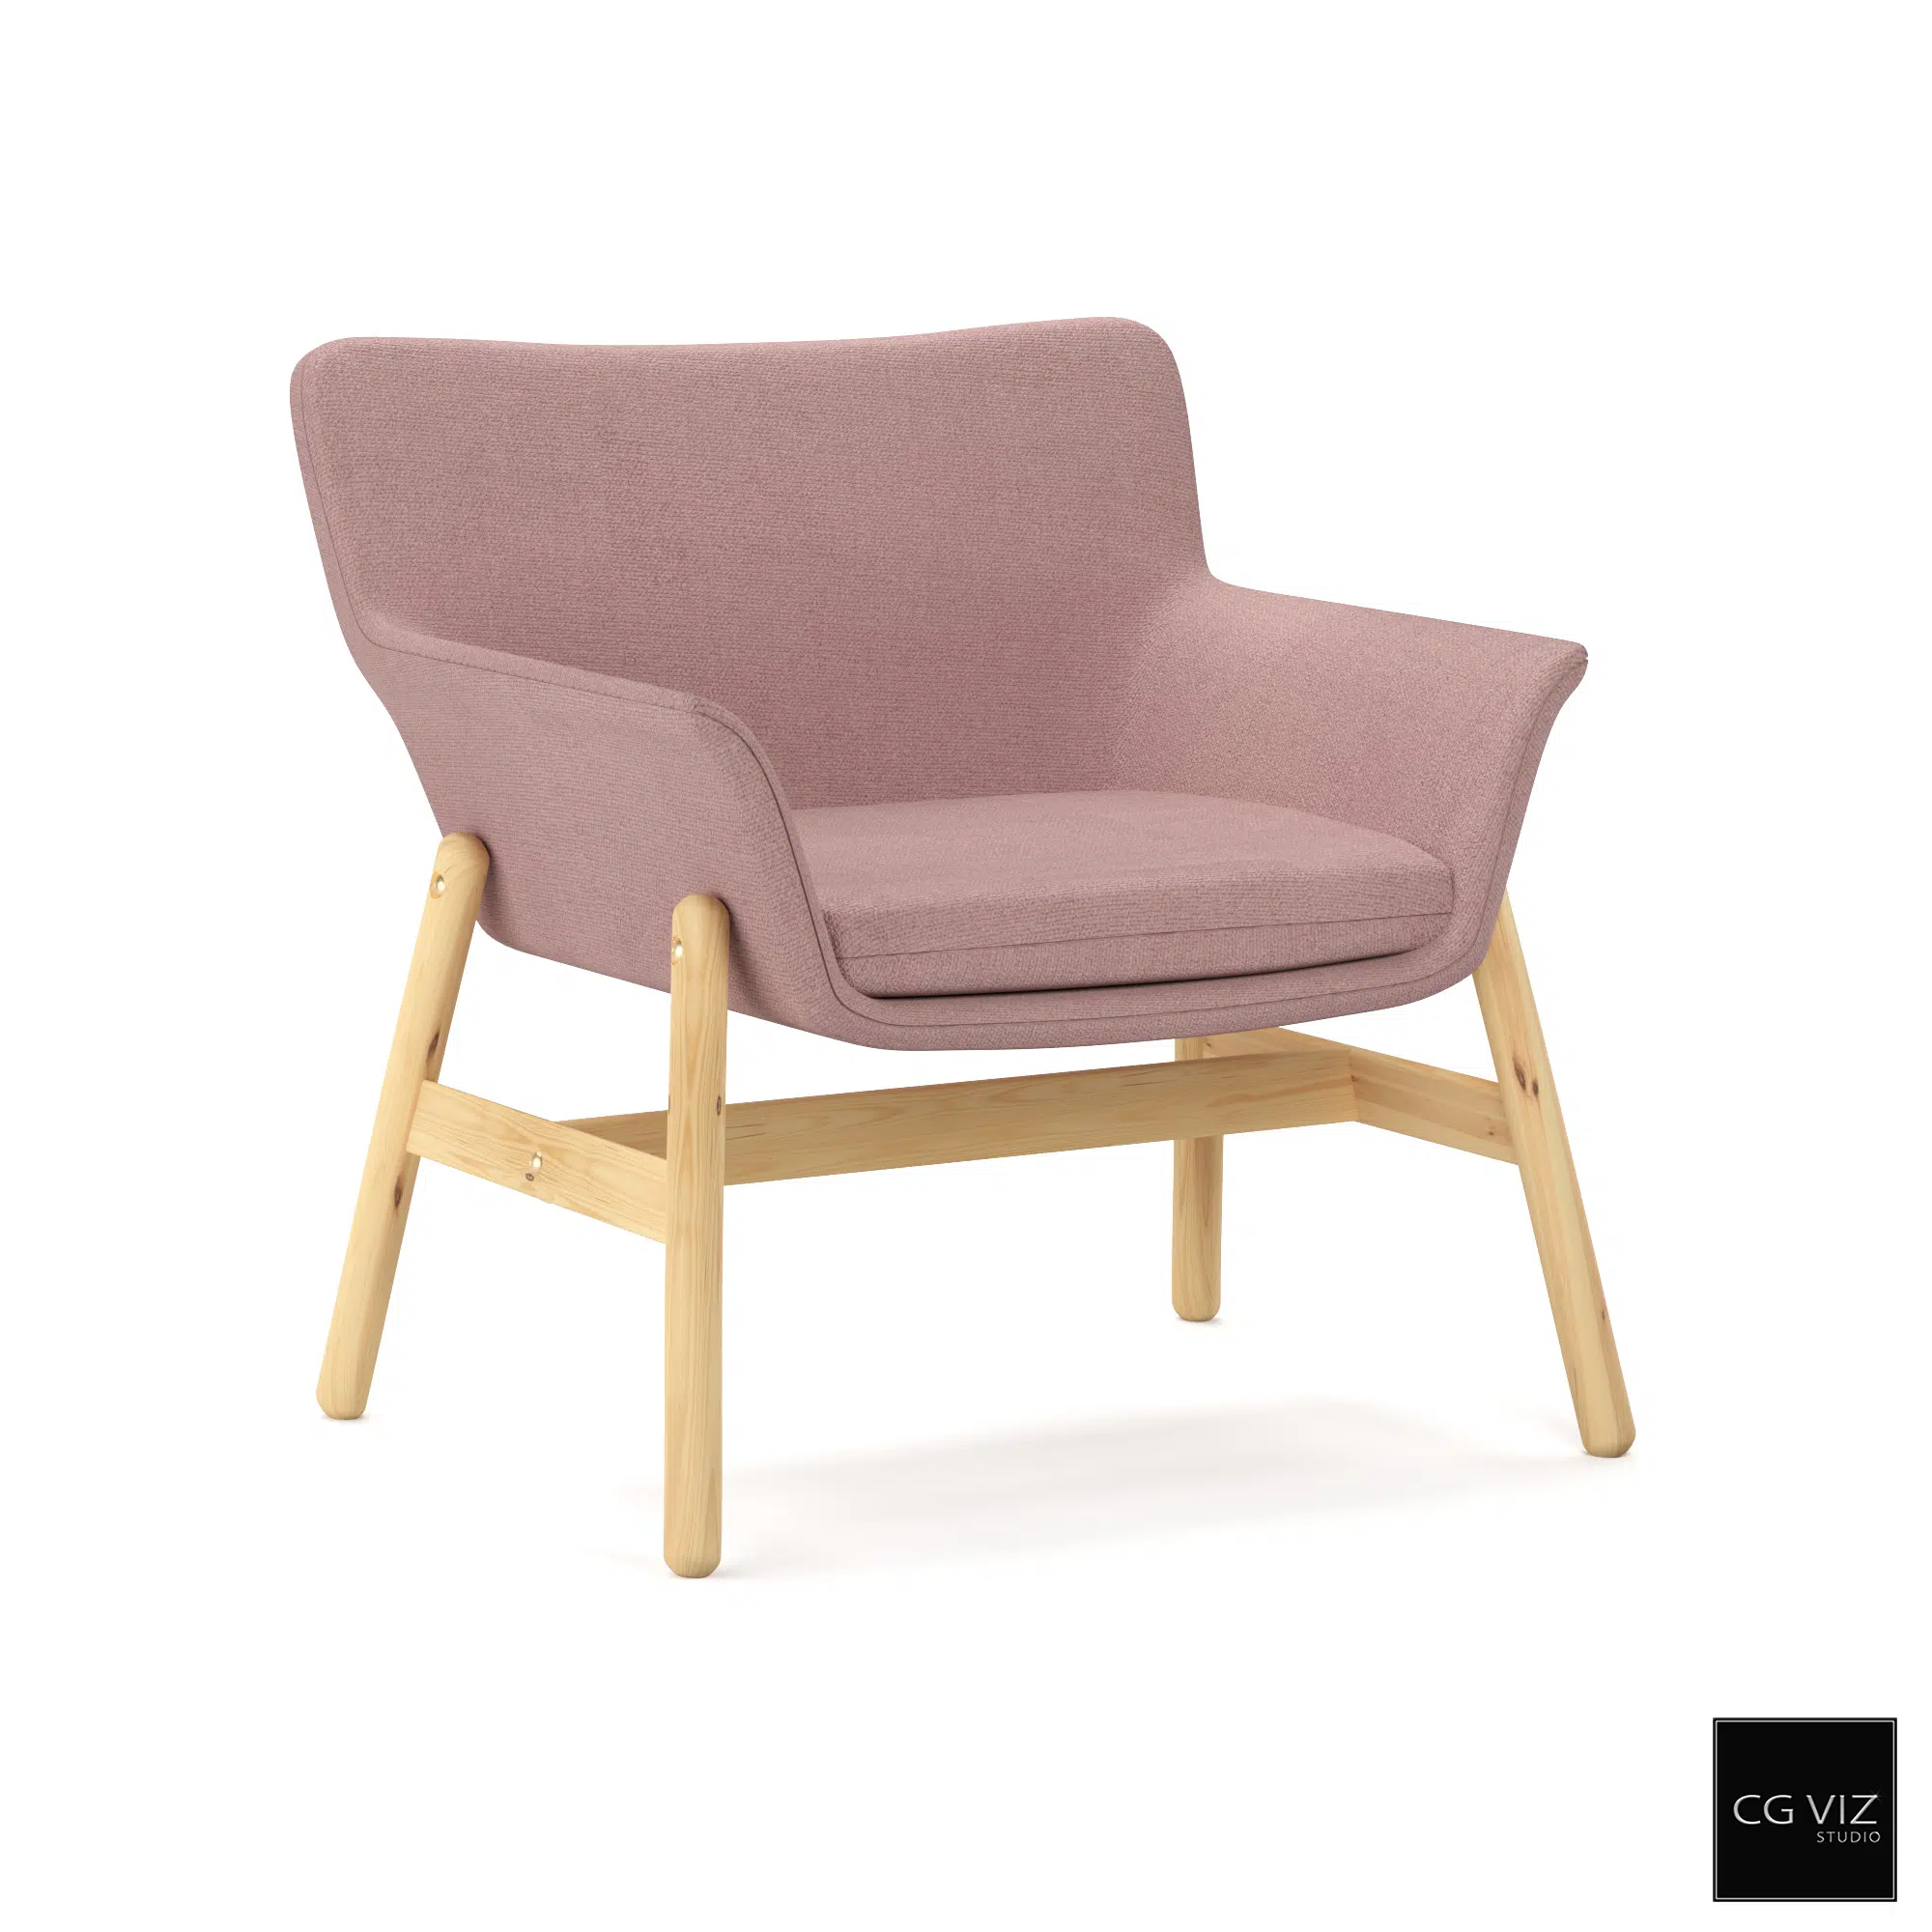 Front view of the Ikea Vedbo Armchair with a pink cushion and wooden legs.